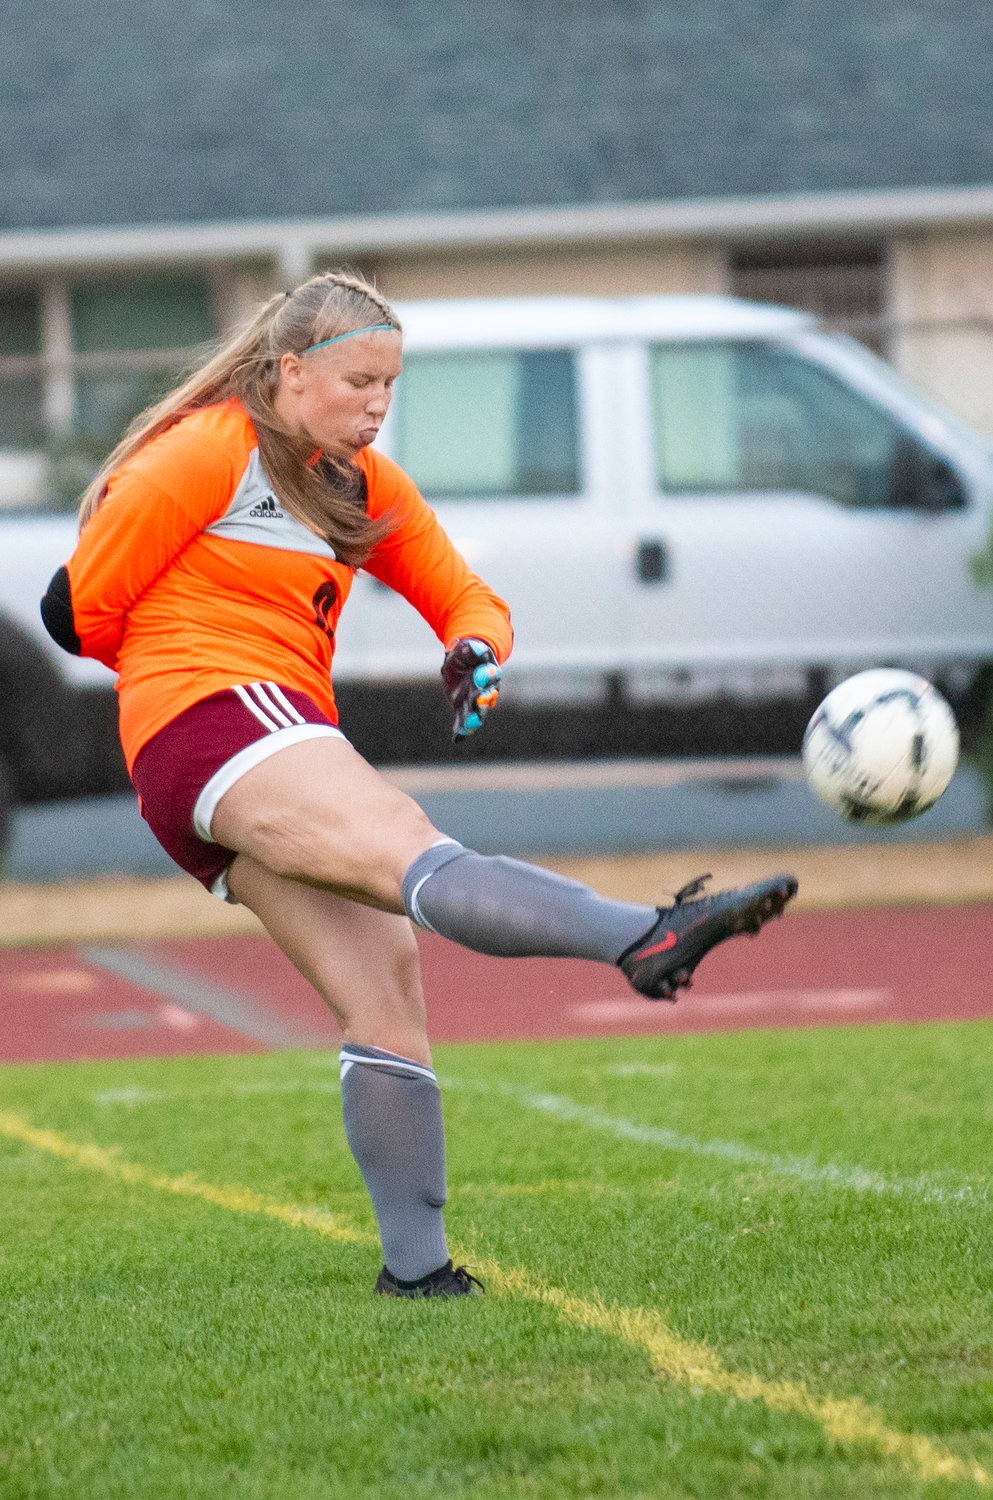 W.F. West sophomore keeper Carlie Deskins boots the ball downfield against Montesano on Tuesday at home.